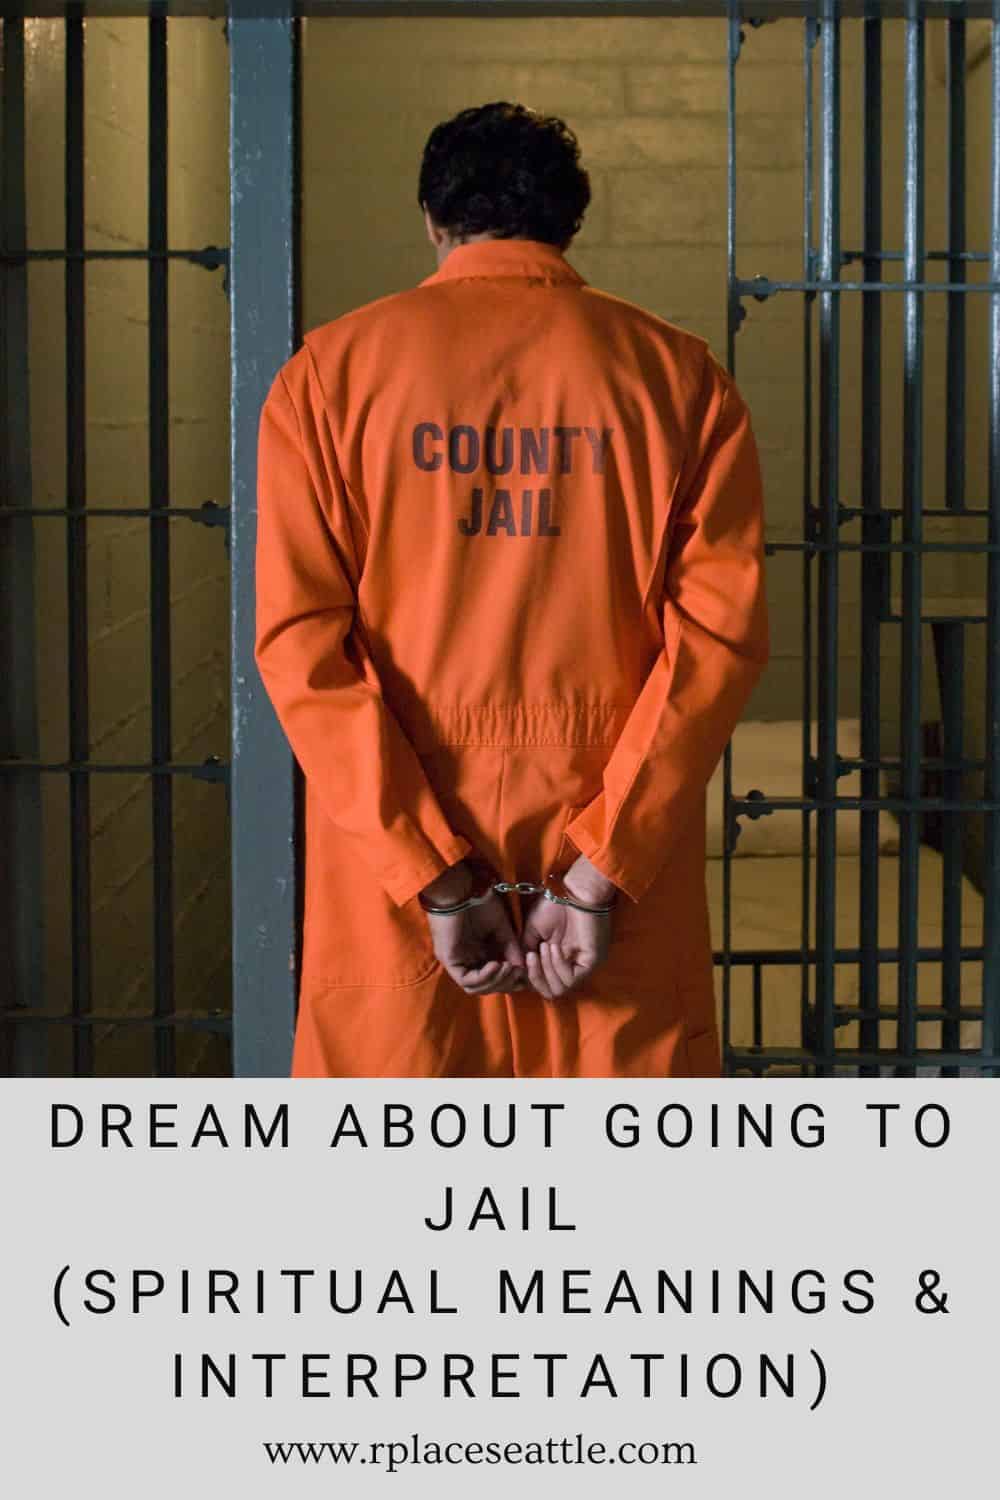 Dream about going to jail (Spiritual Meanings & Interpretation)